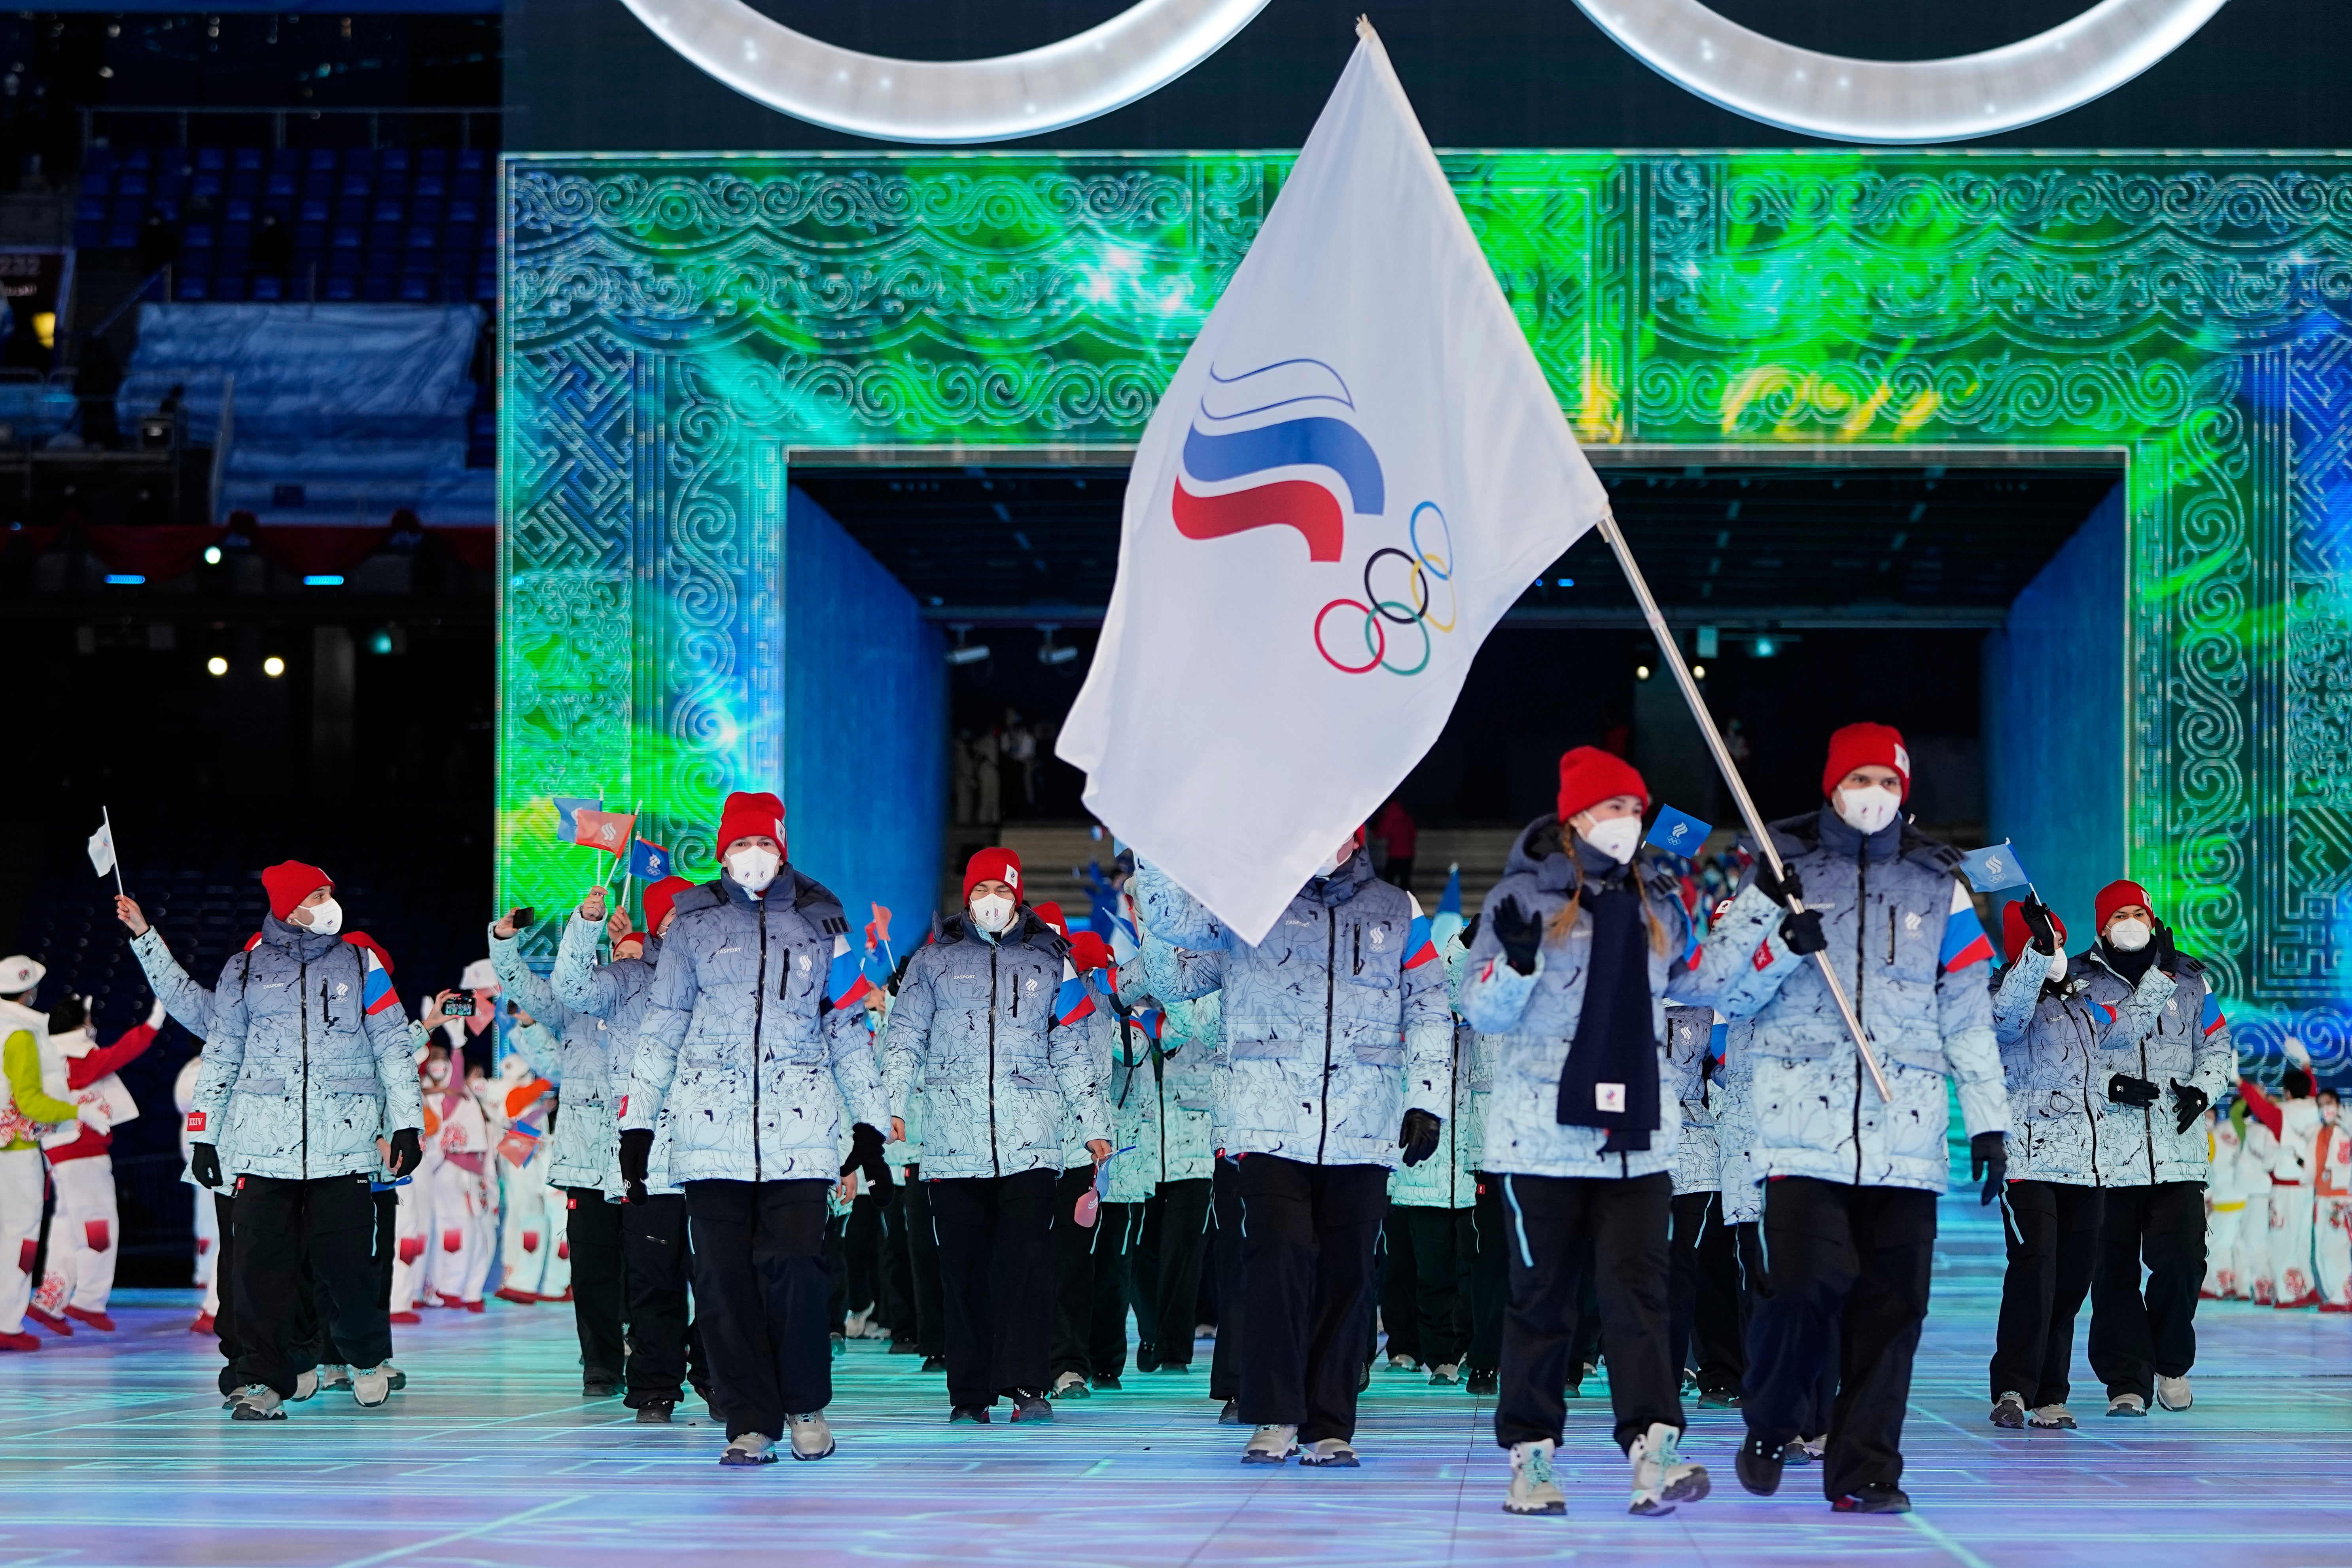 Russian athletes competed at the Winter Olympics under ‘ROC'